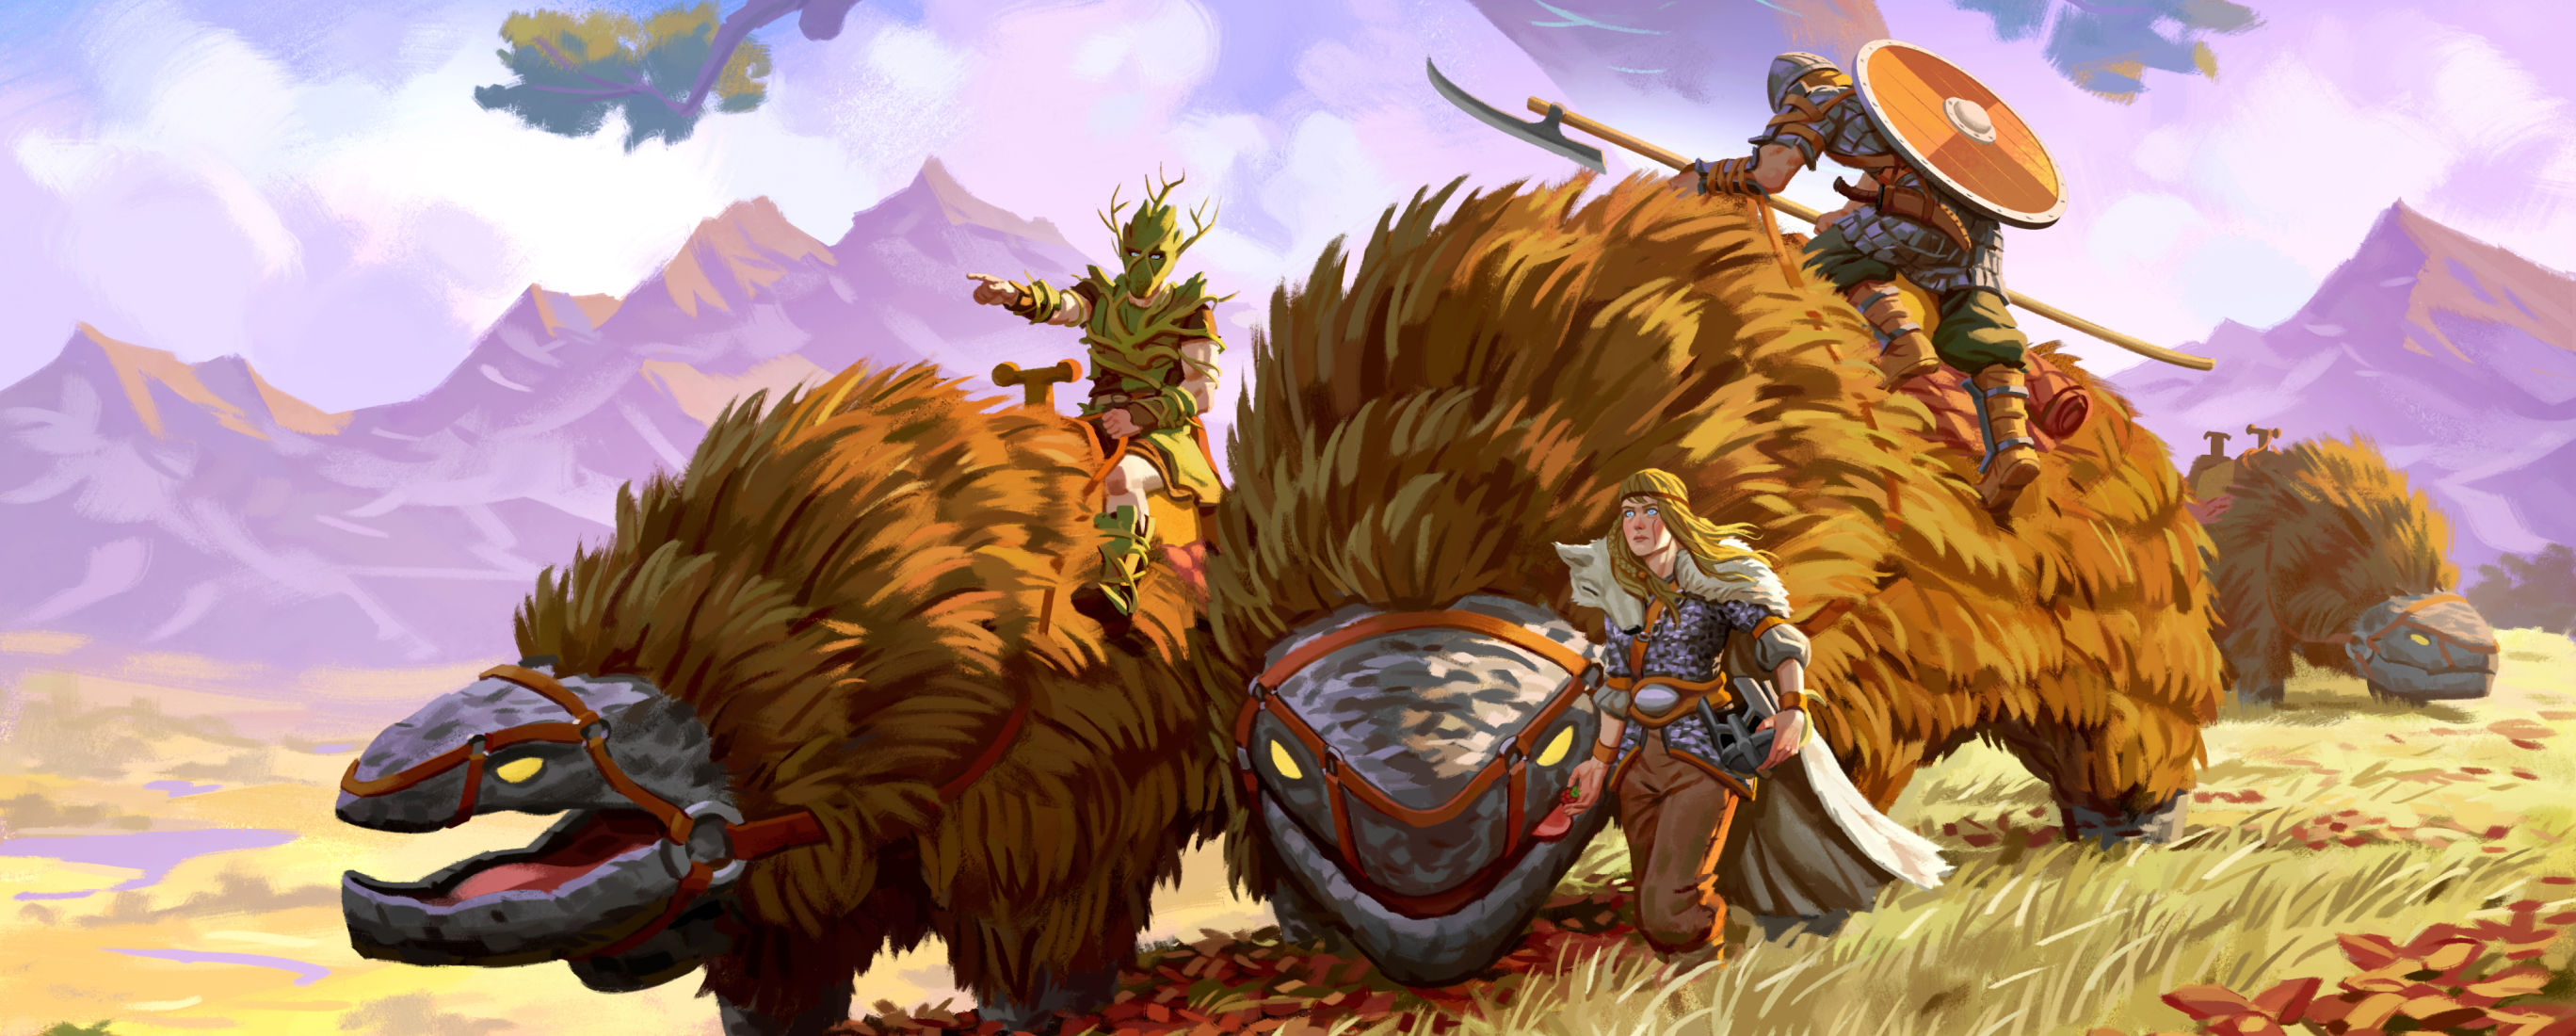 Three warriors traversing the land of Valheim with the world tree in the background.